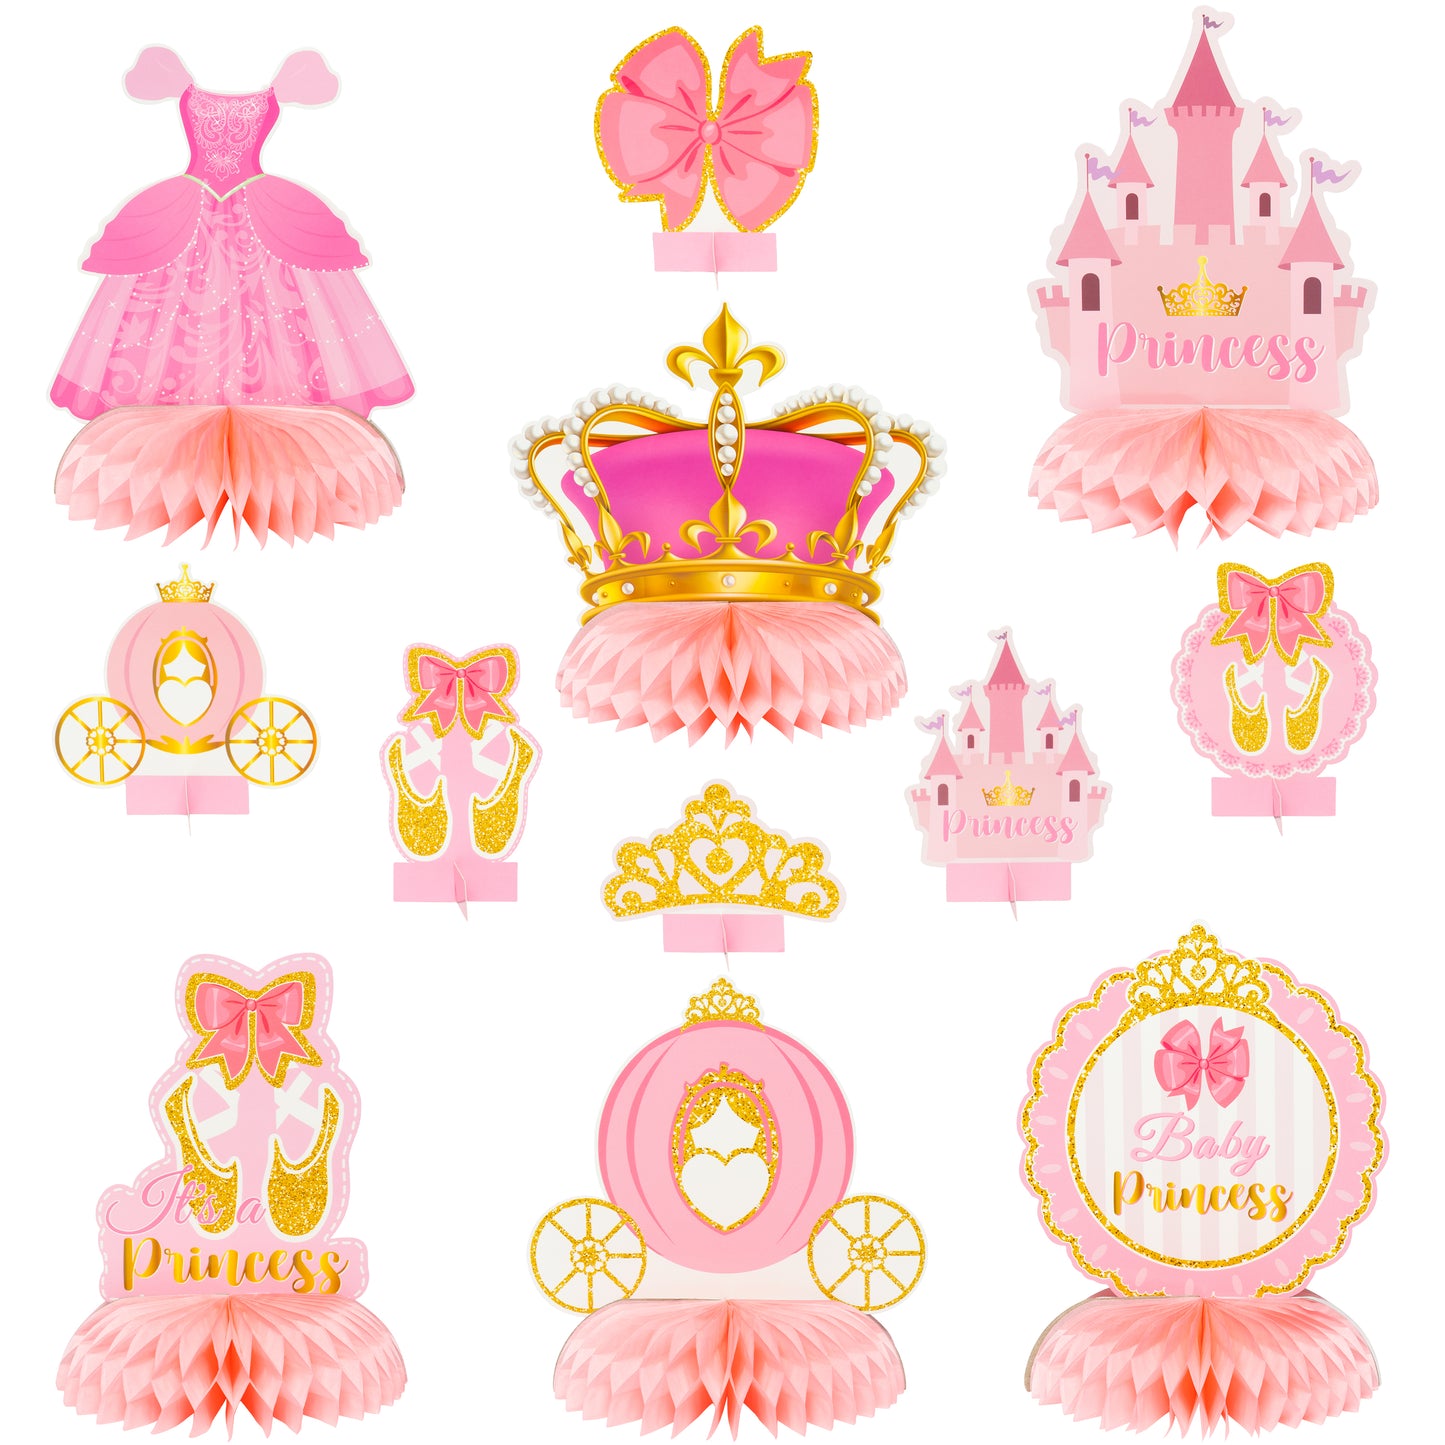 G1ngtar 12Pcs Pink Princess Baby Shower Party Honeycomb Centerpieces for Girls It’s a Princess Girl Gender Reveal Party Table Toppers Pink and Gold Party Decorations Supplies Favors Photo Booth Props